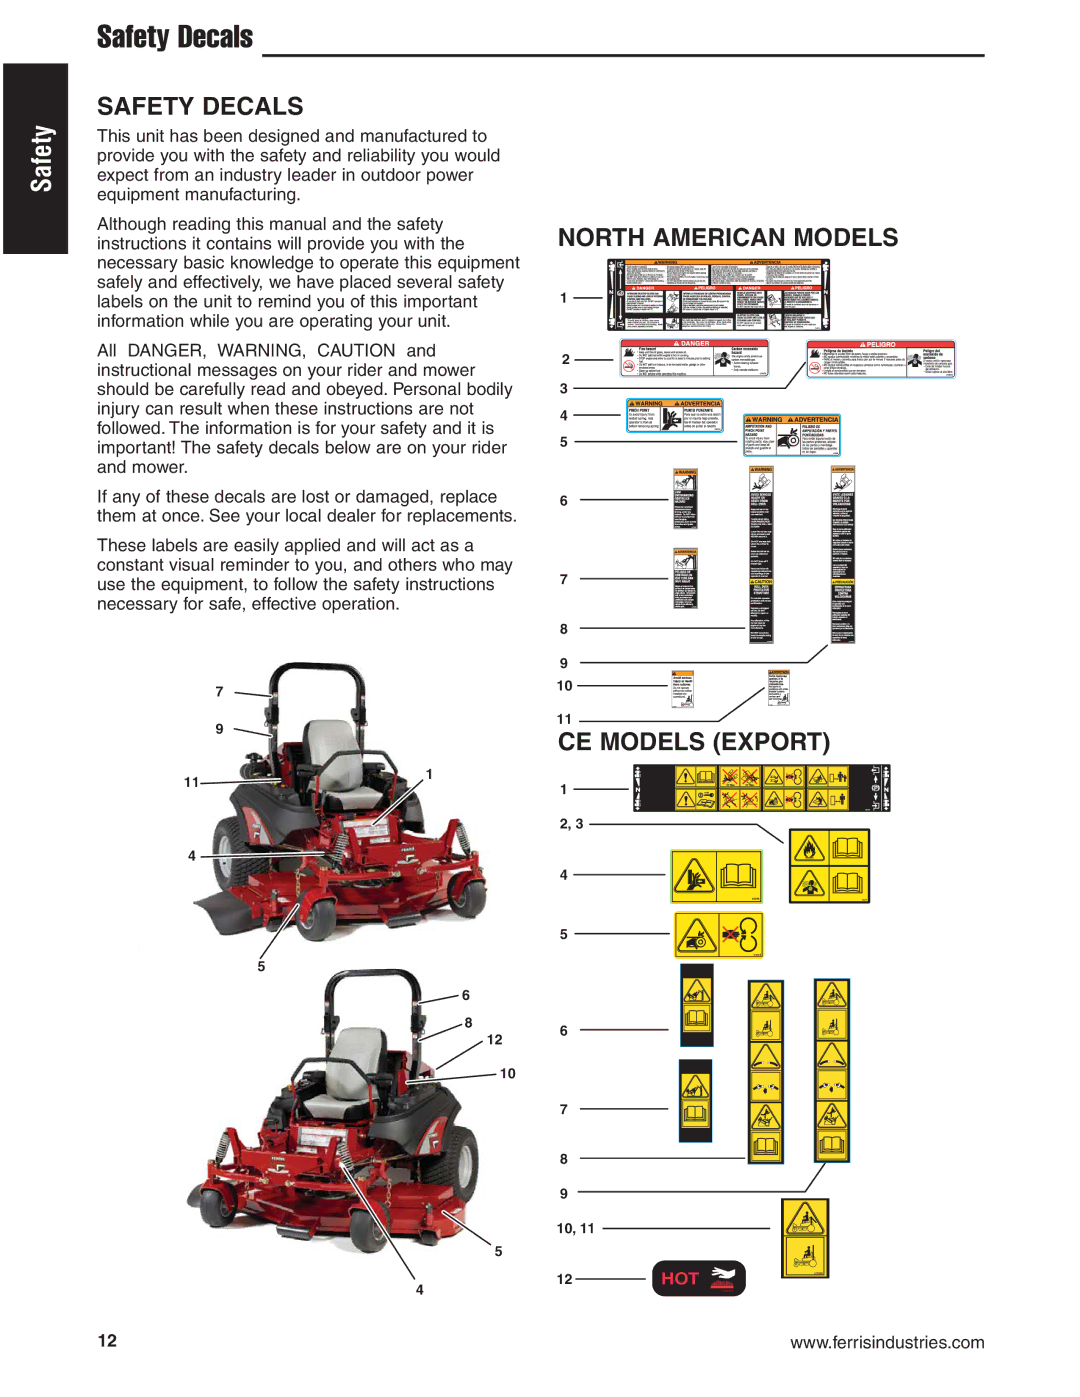 Briggs & Stratton 5900619 manual Safety Decals, North American Models CE Models Export 